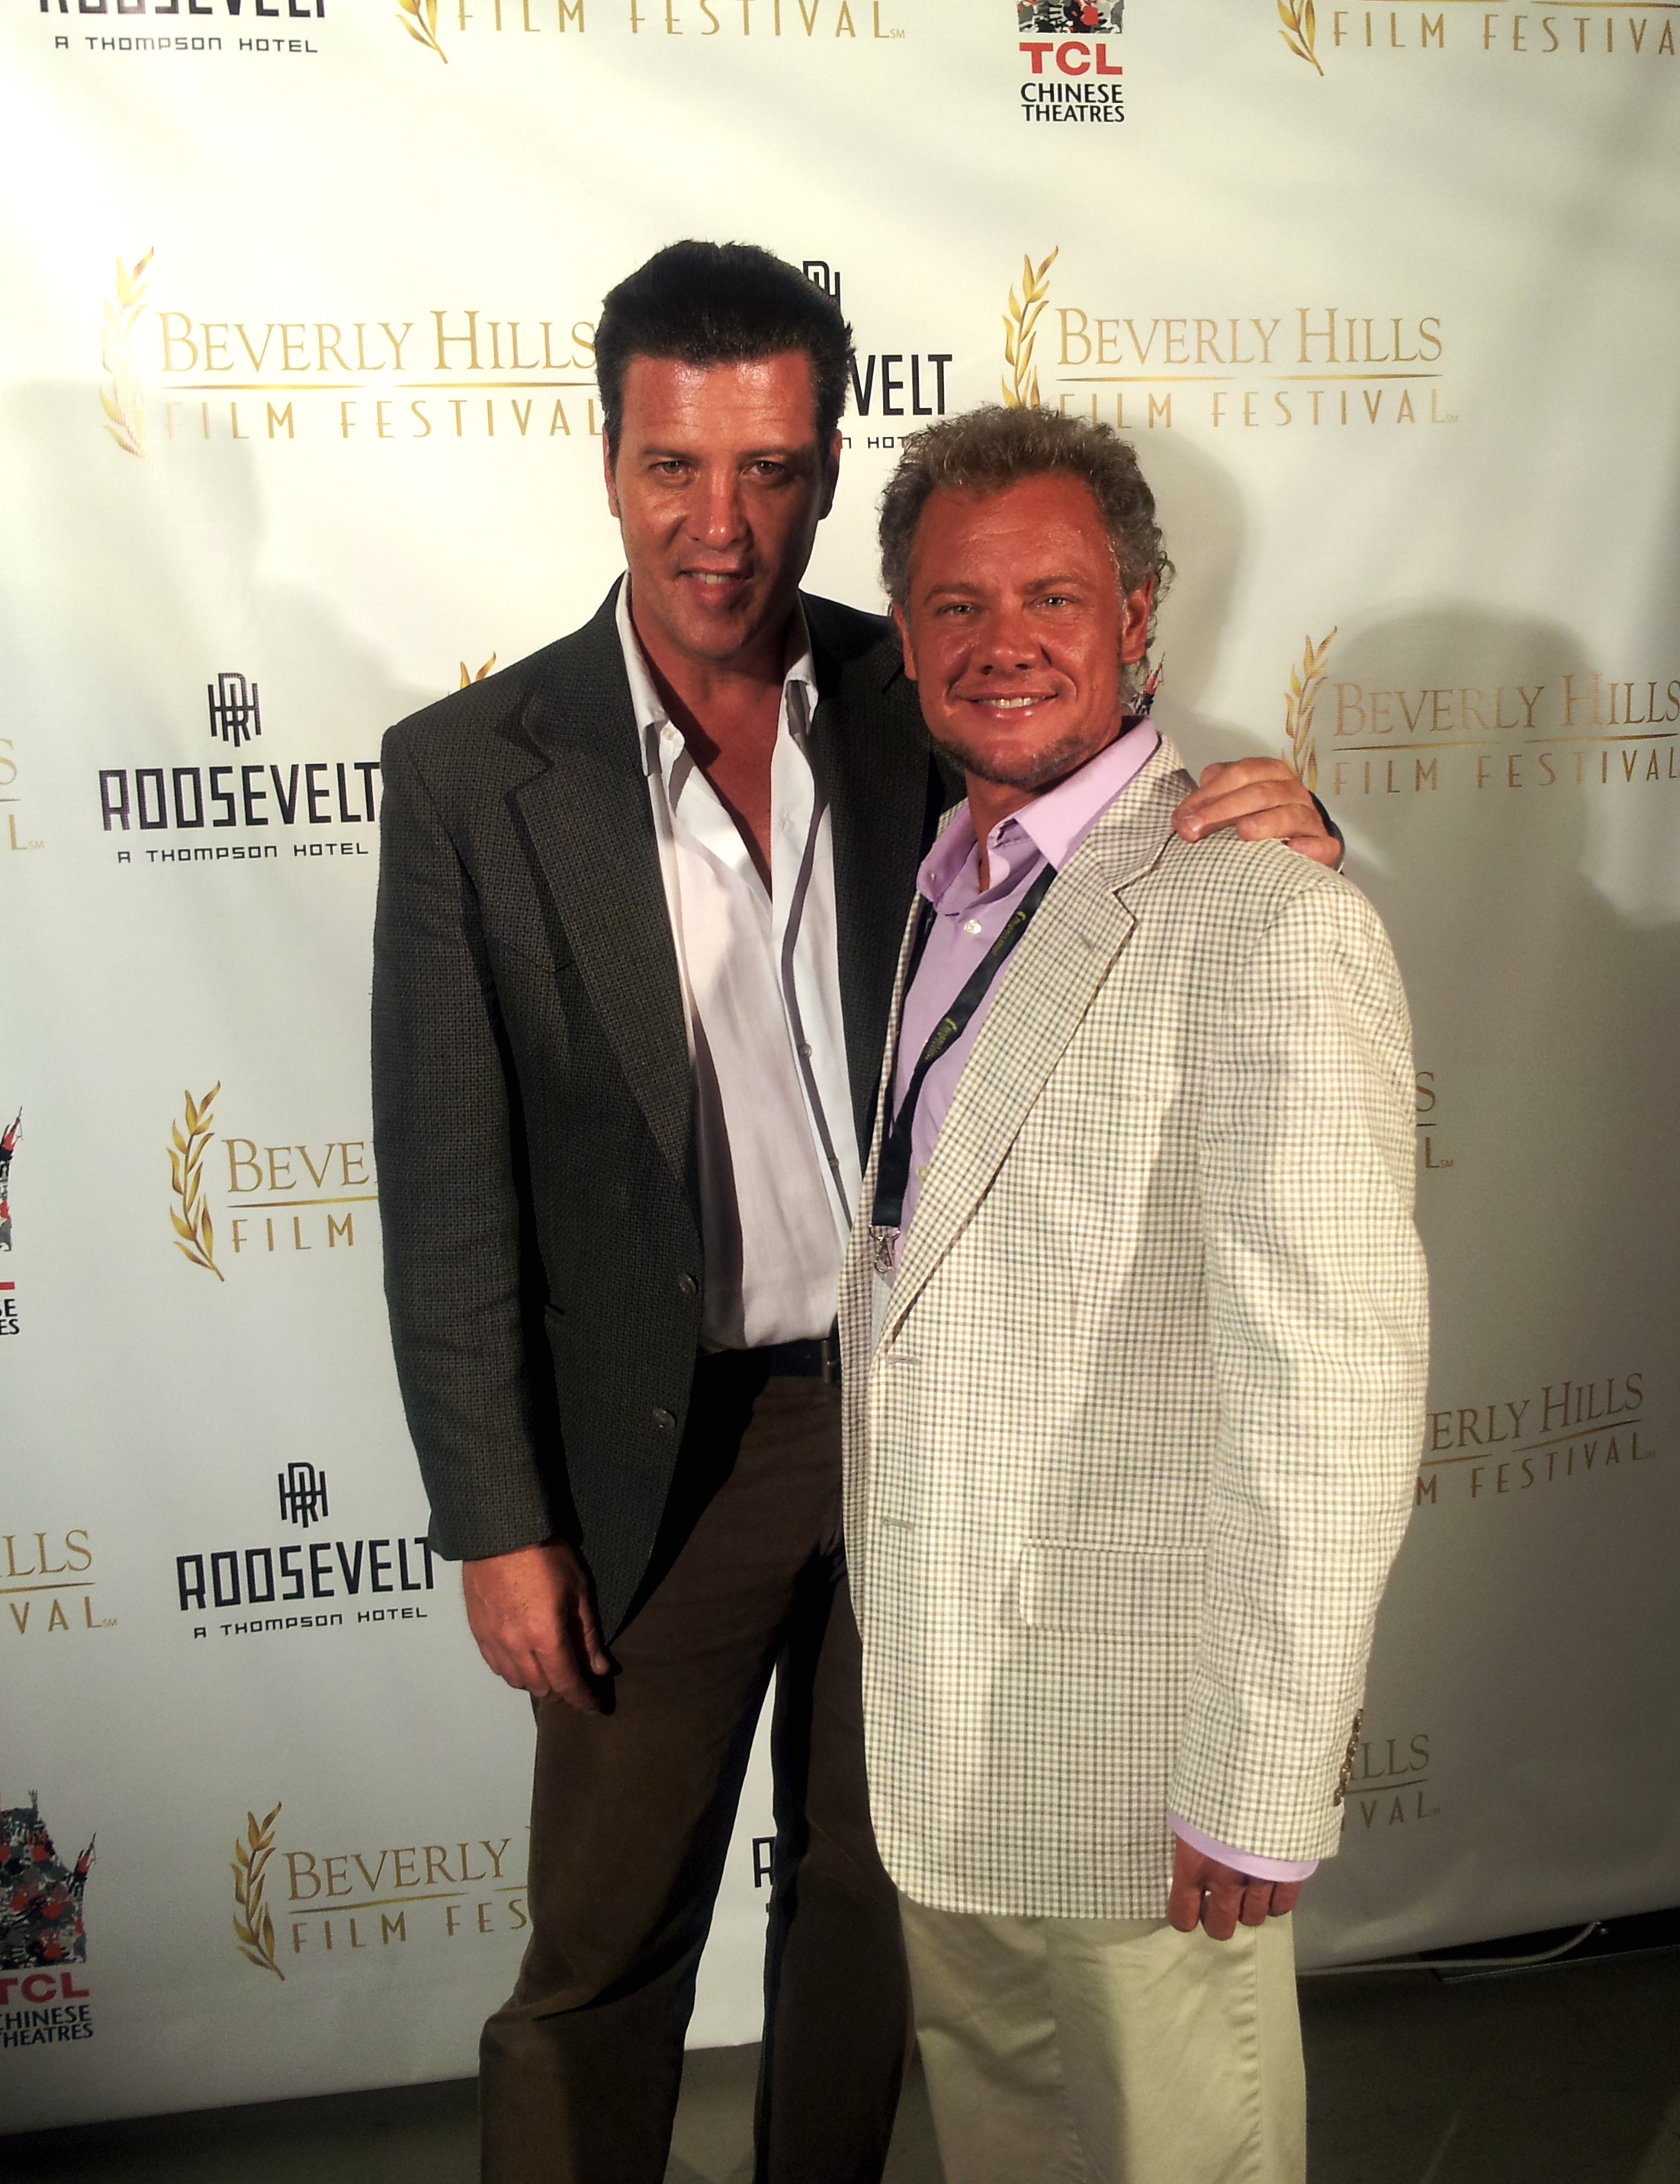 Tracy Kowalski and Peter Dobson at the Beverly Hills Film Festival 2013.